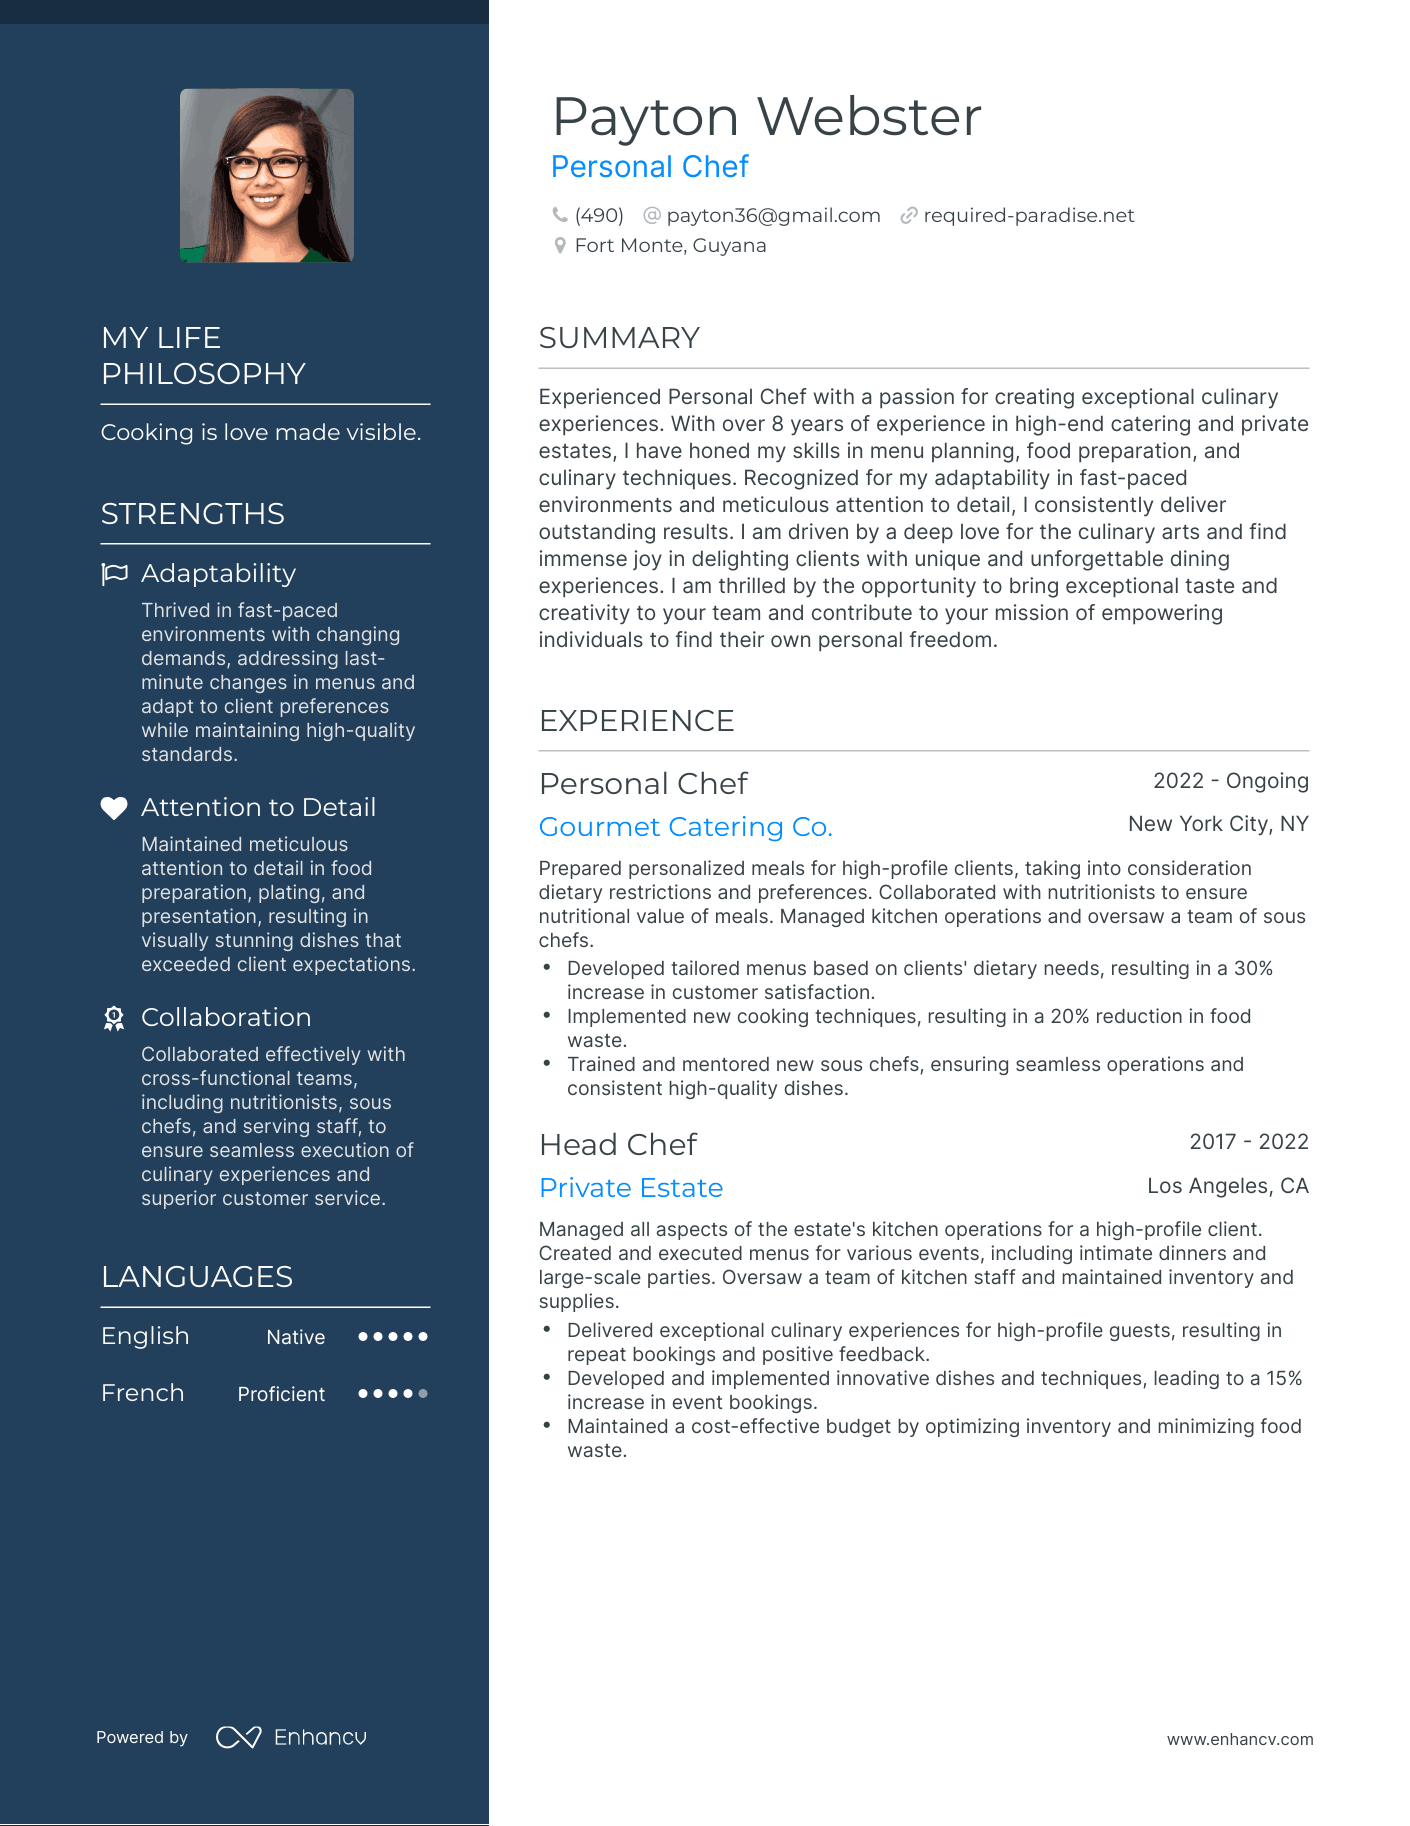 Personal Chef resume example